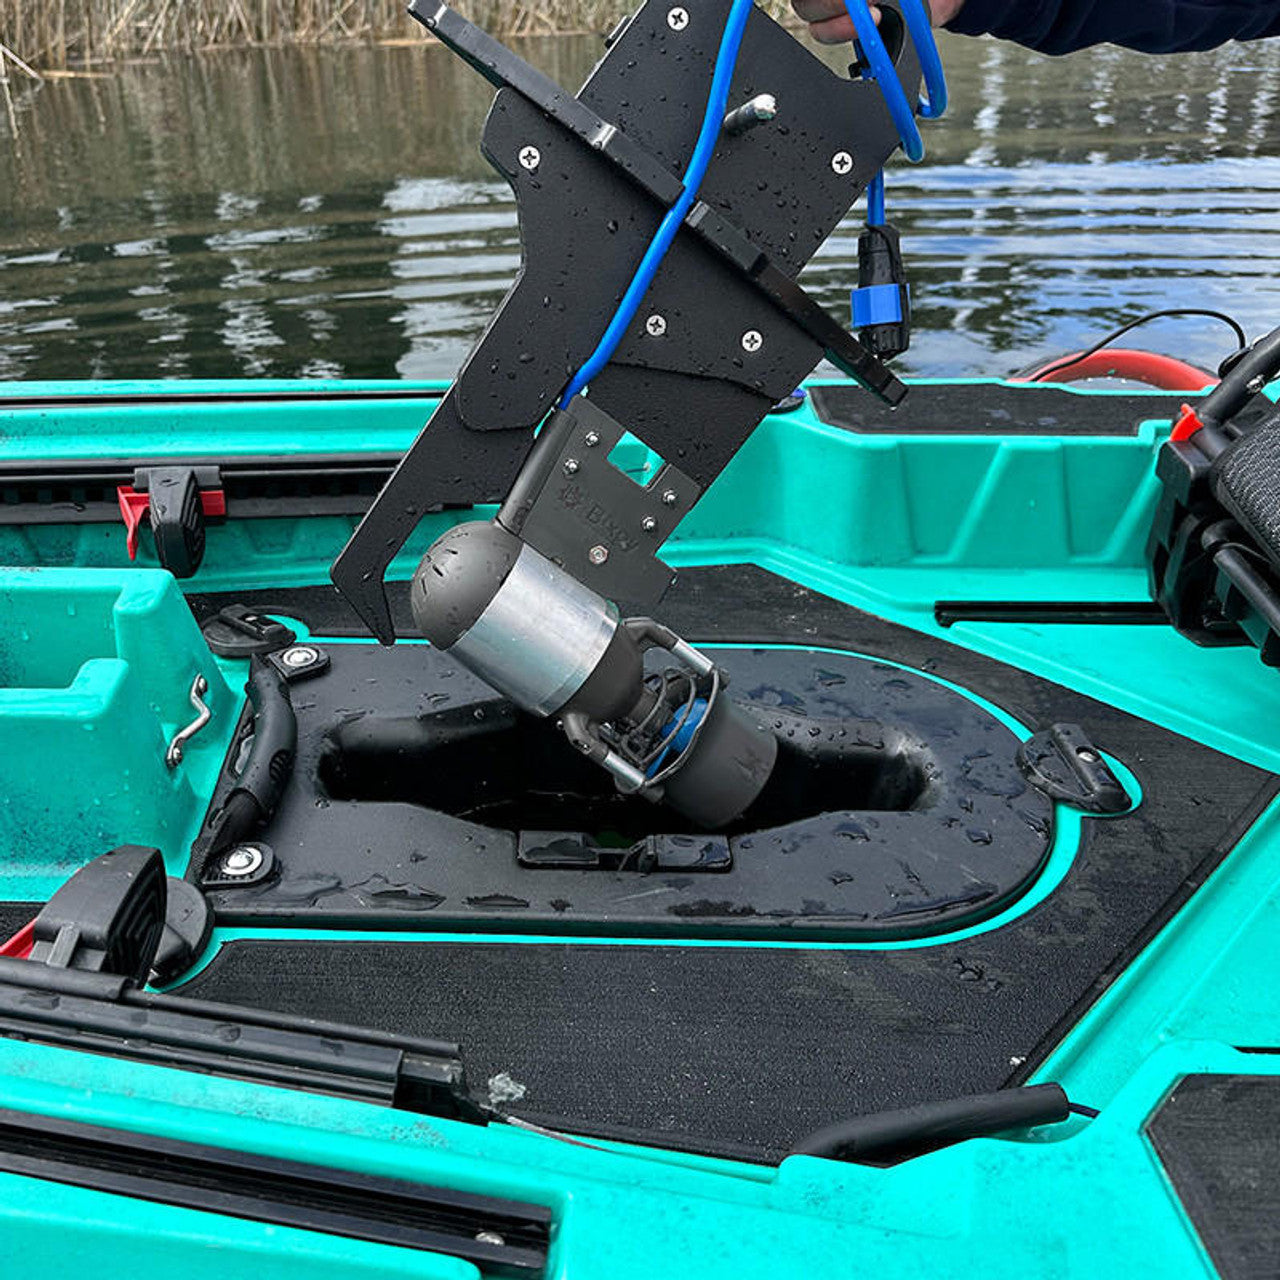 Bixpy K1 Angler Pro Outboard Kit™ - Electric Marine Trolling Motor with Remote